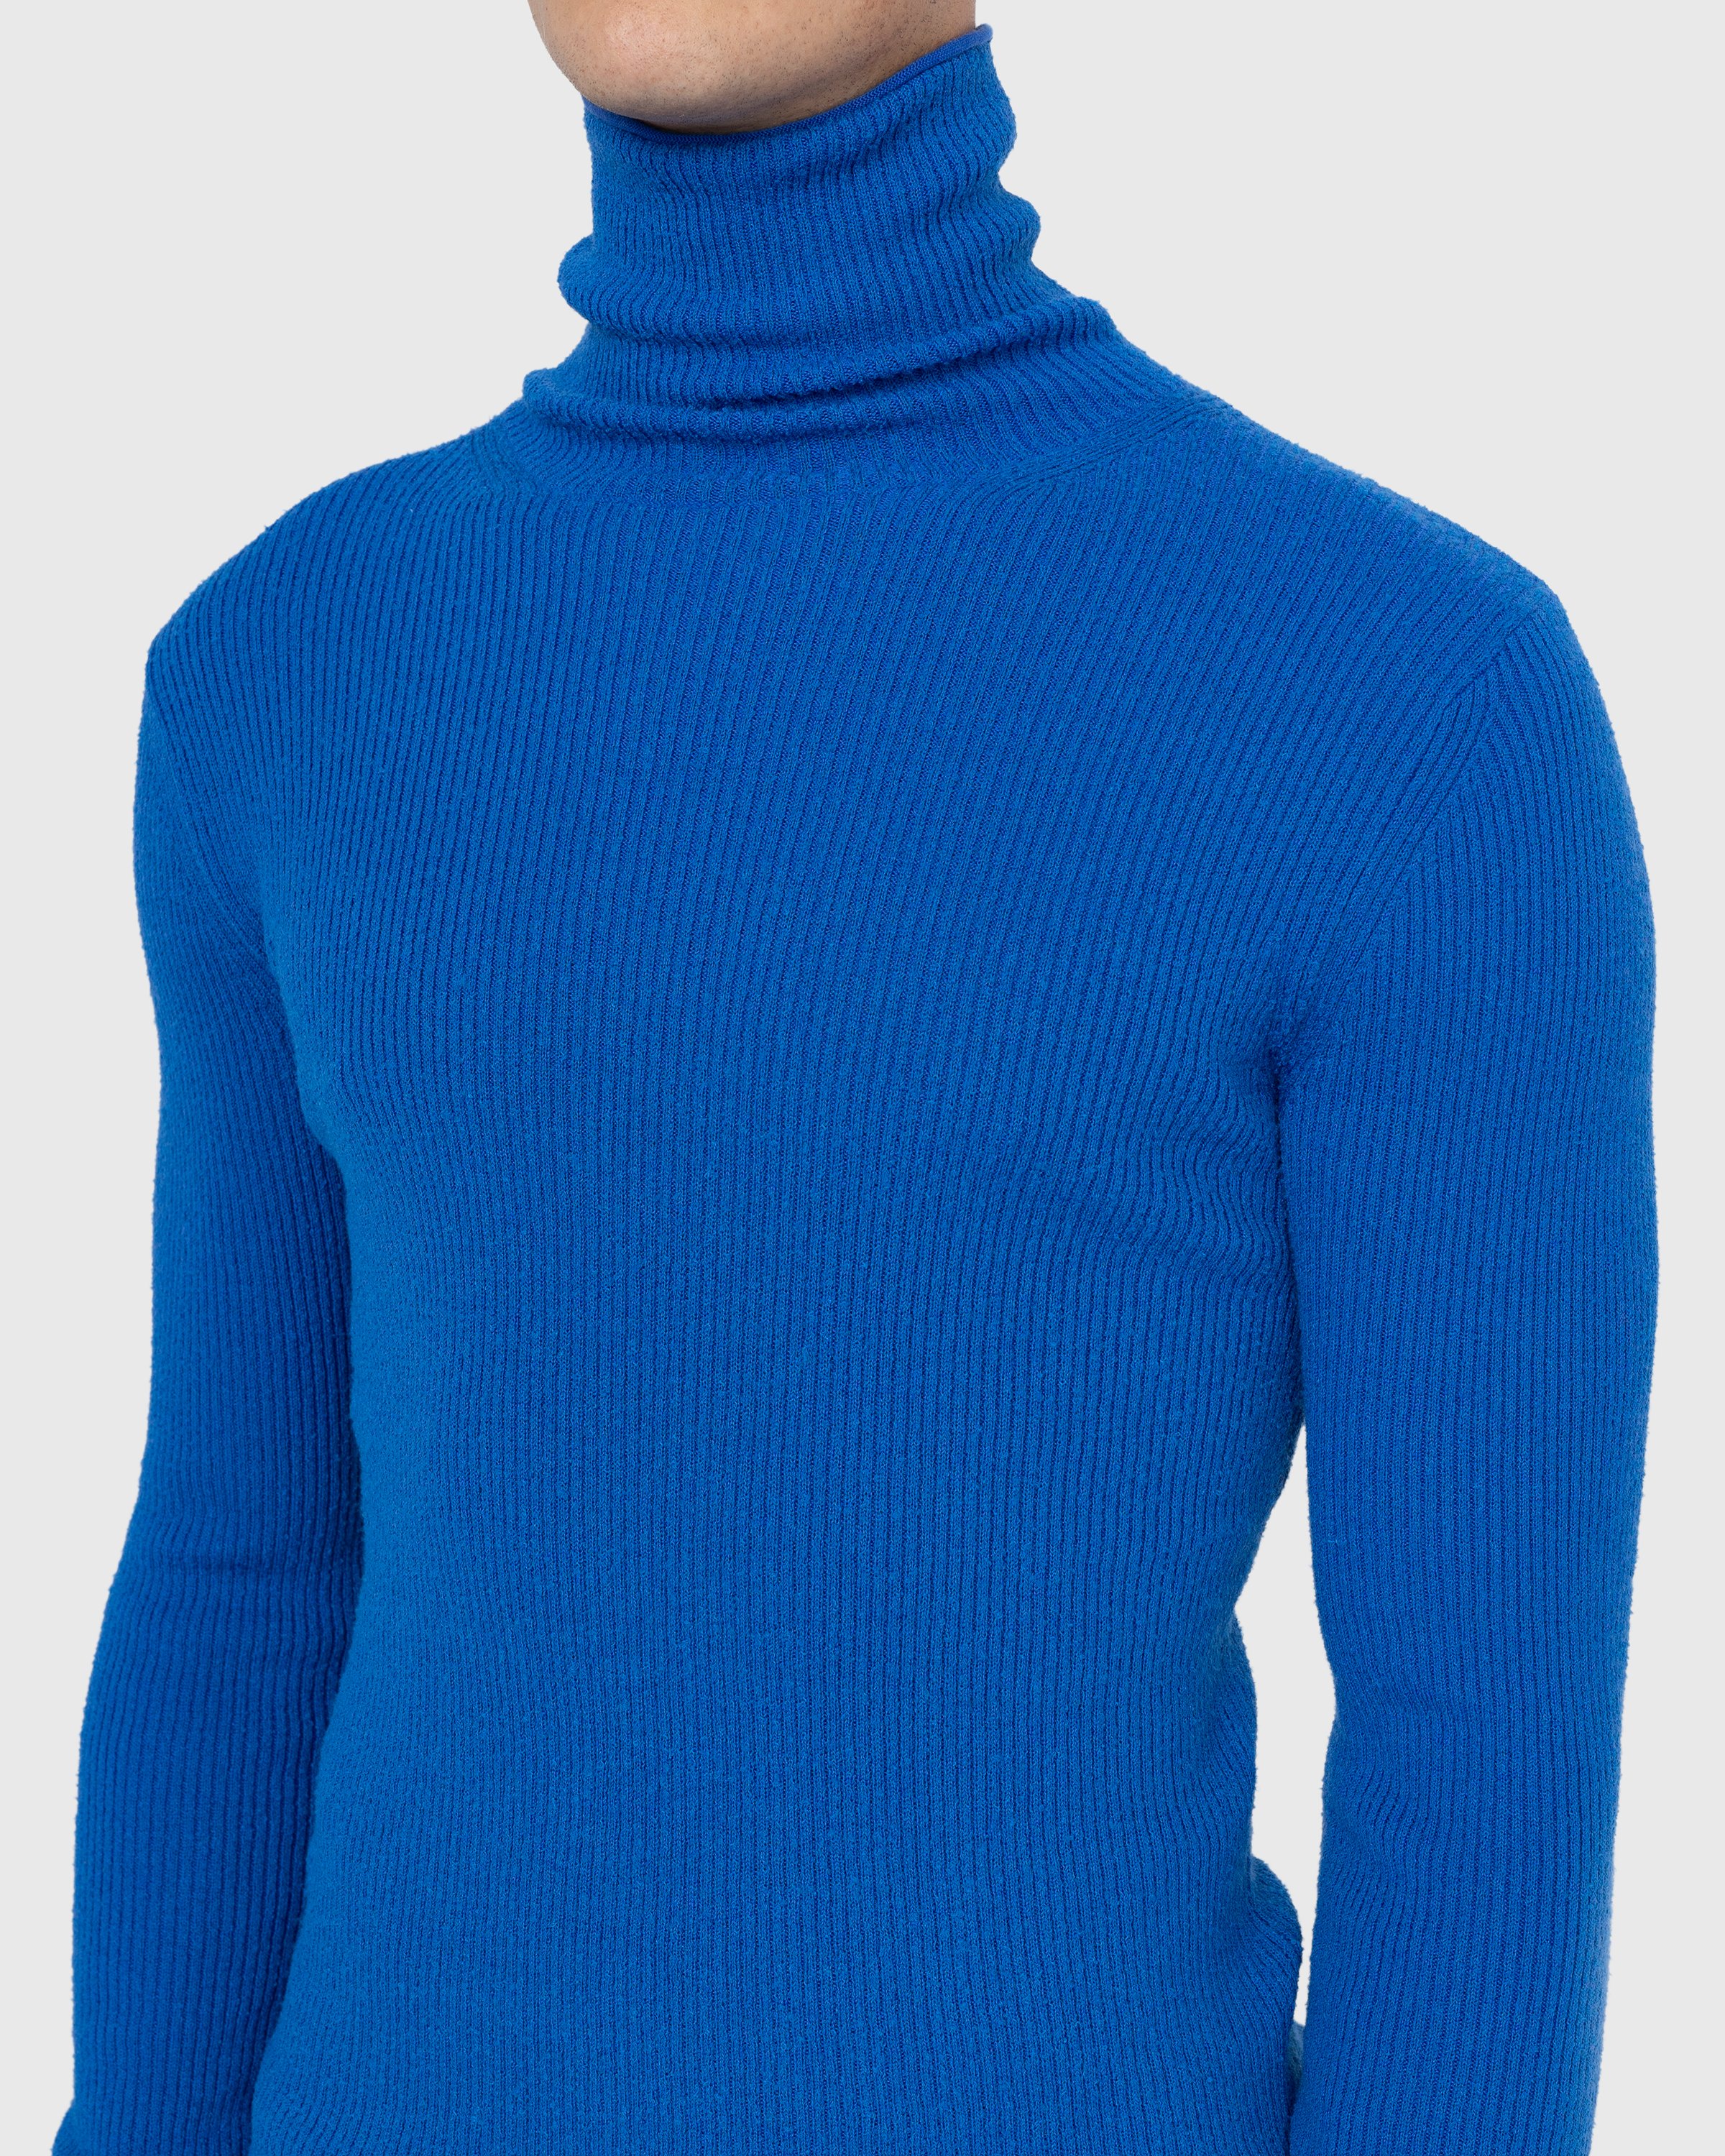 Acne Studios - Roll Neck Ribbed Knit Sweater Ultramarine Blue - Clothing - Blue - Image 6